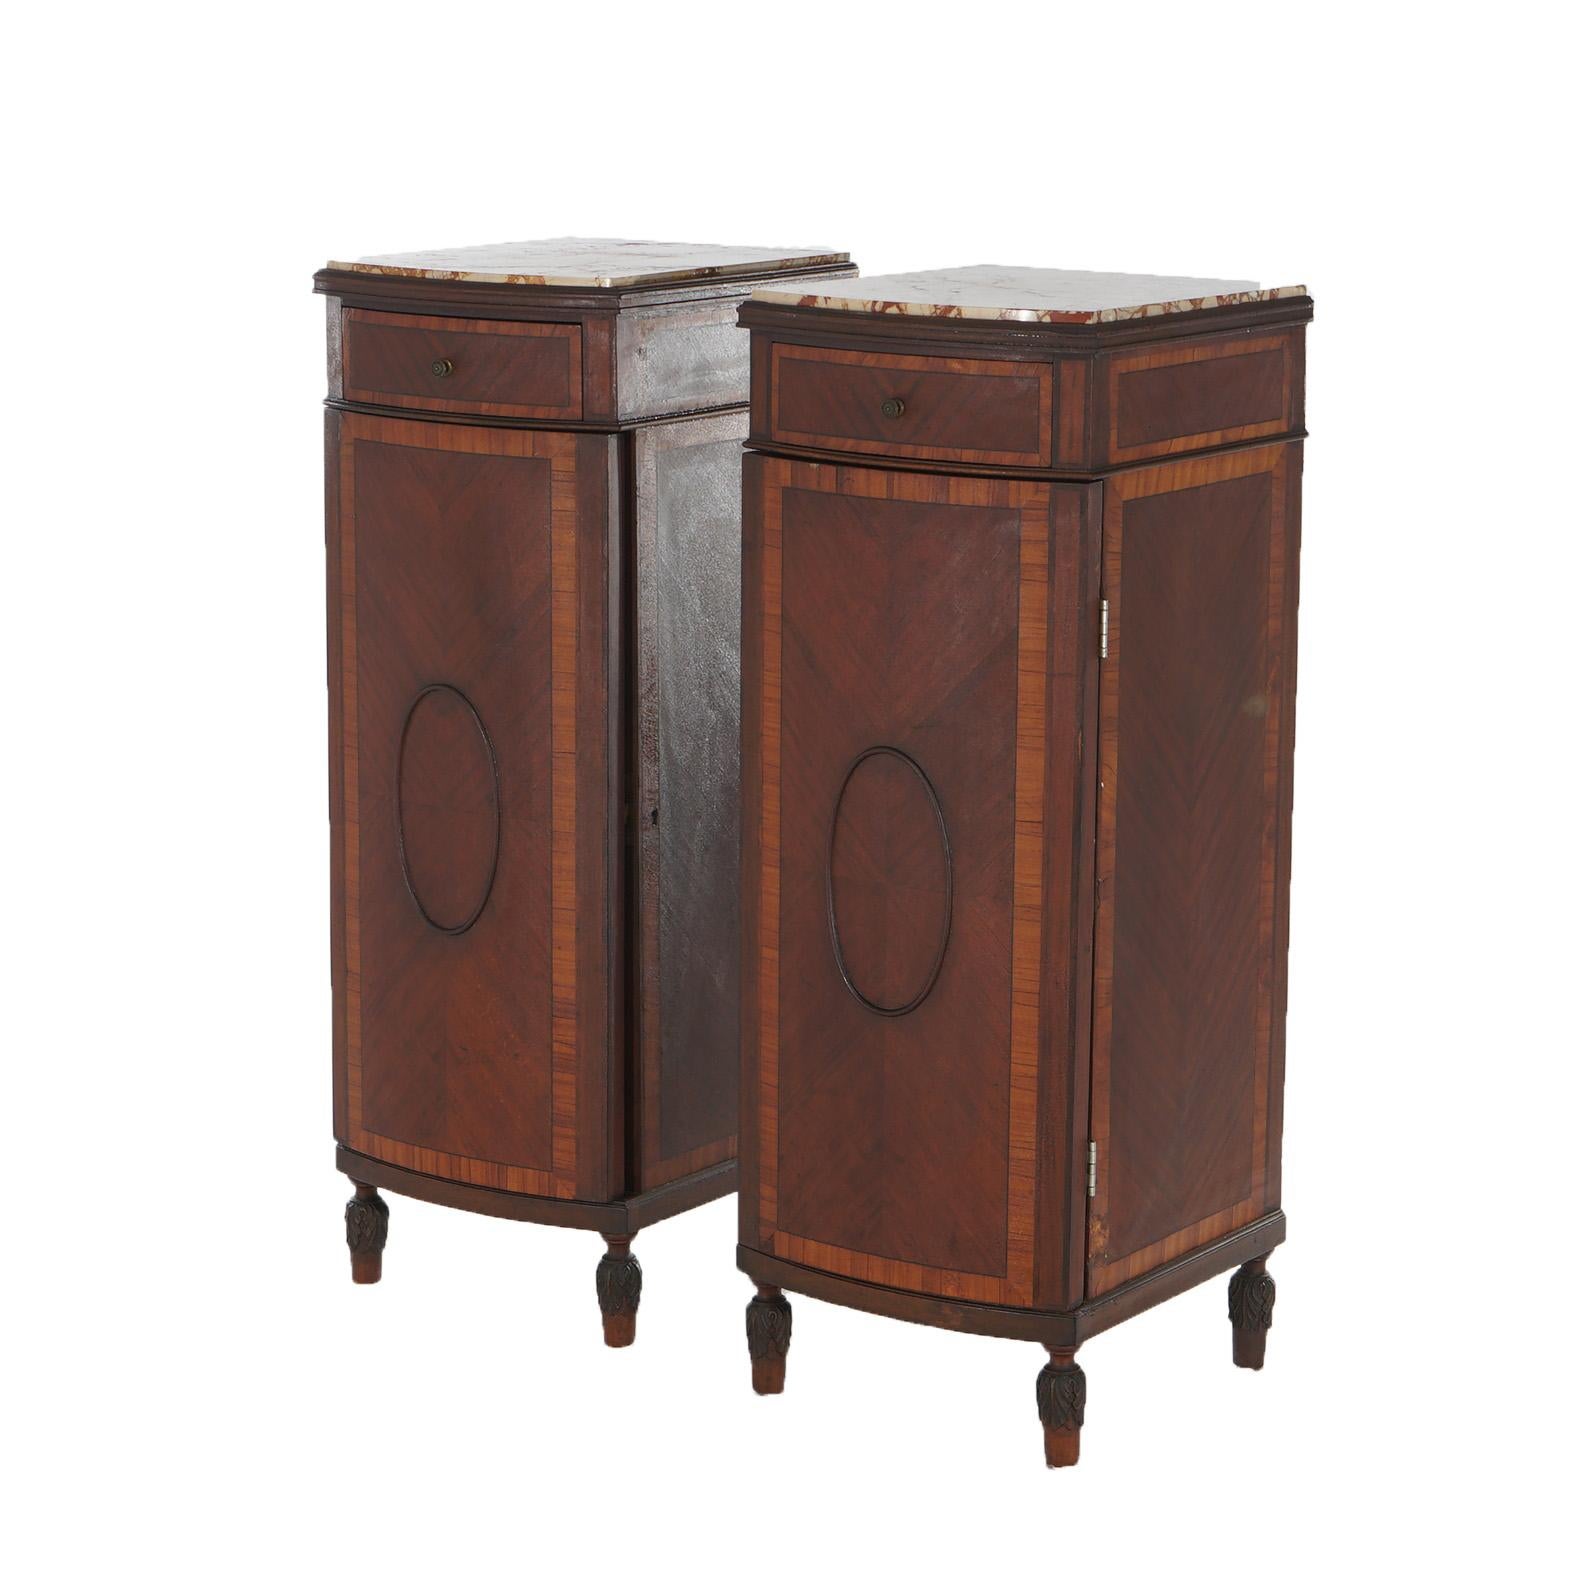 ***Ask About Reduced In-House Shipping Rates - Reliable Service & Fully Insured***

Antique Pair French Mahogany & Satinwood Inlaid Marble Top Single Drawer and Cross-Banded Side Cabinets C1900

Measures - 42